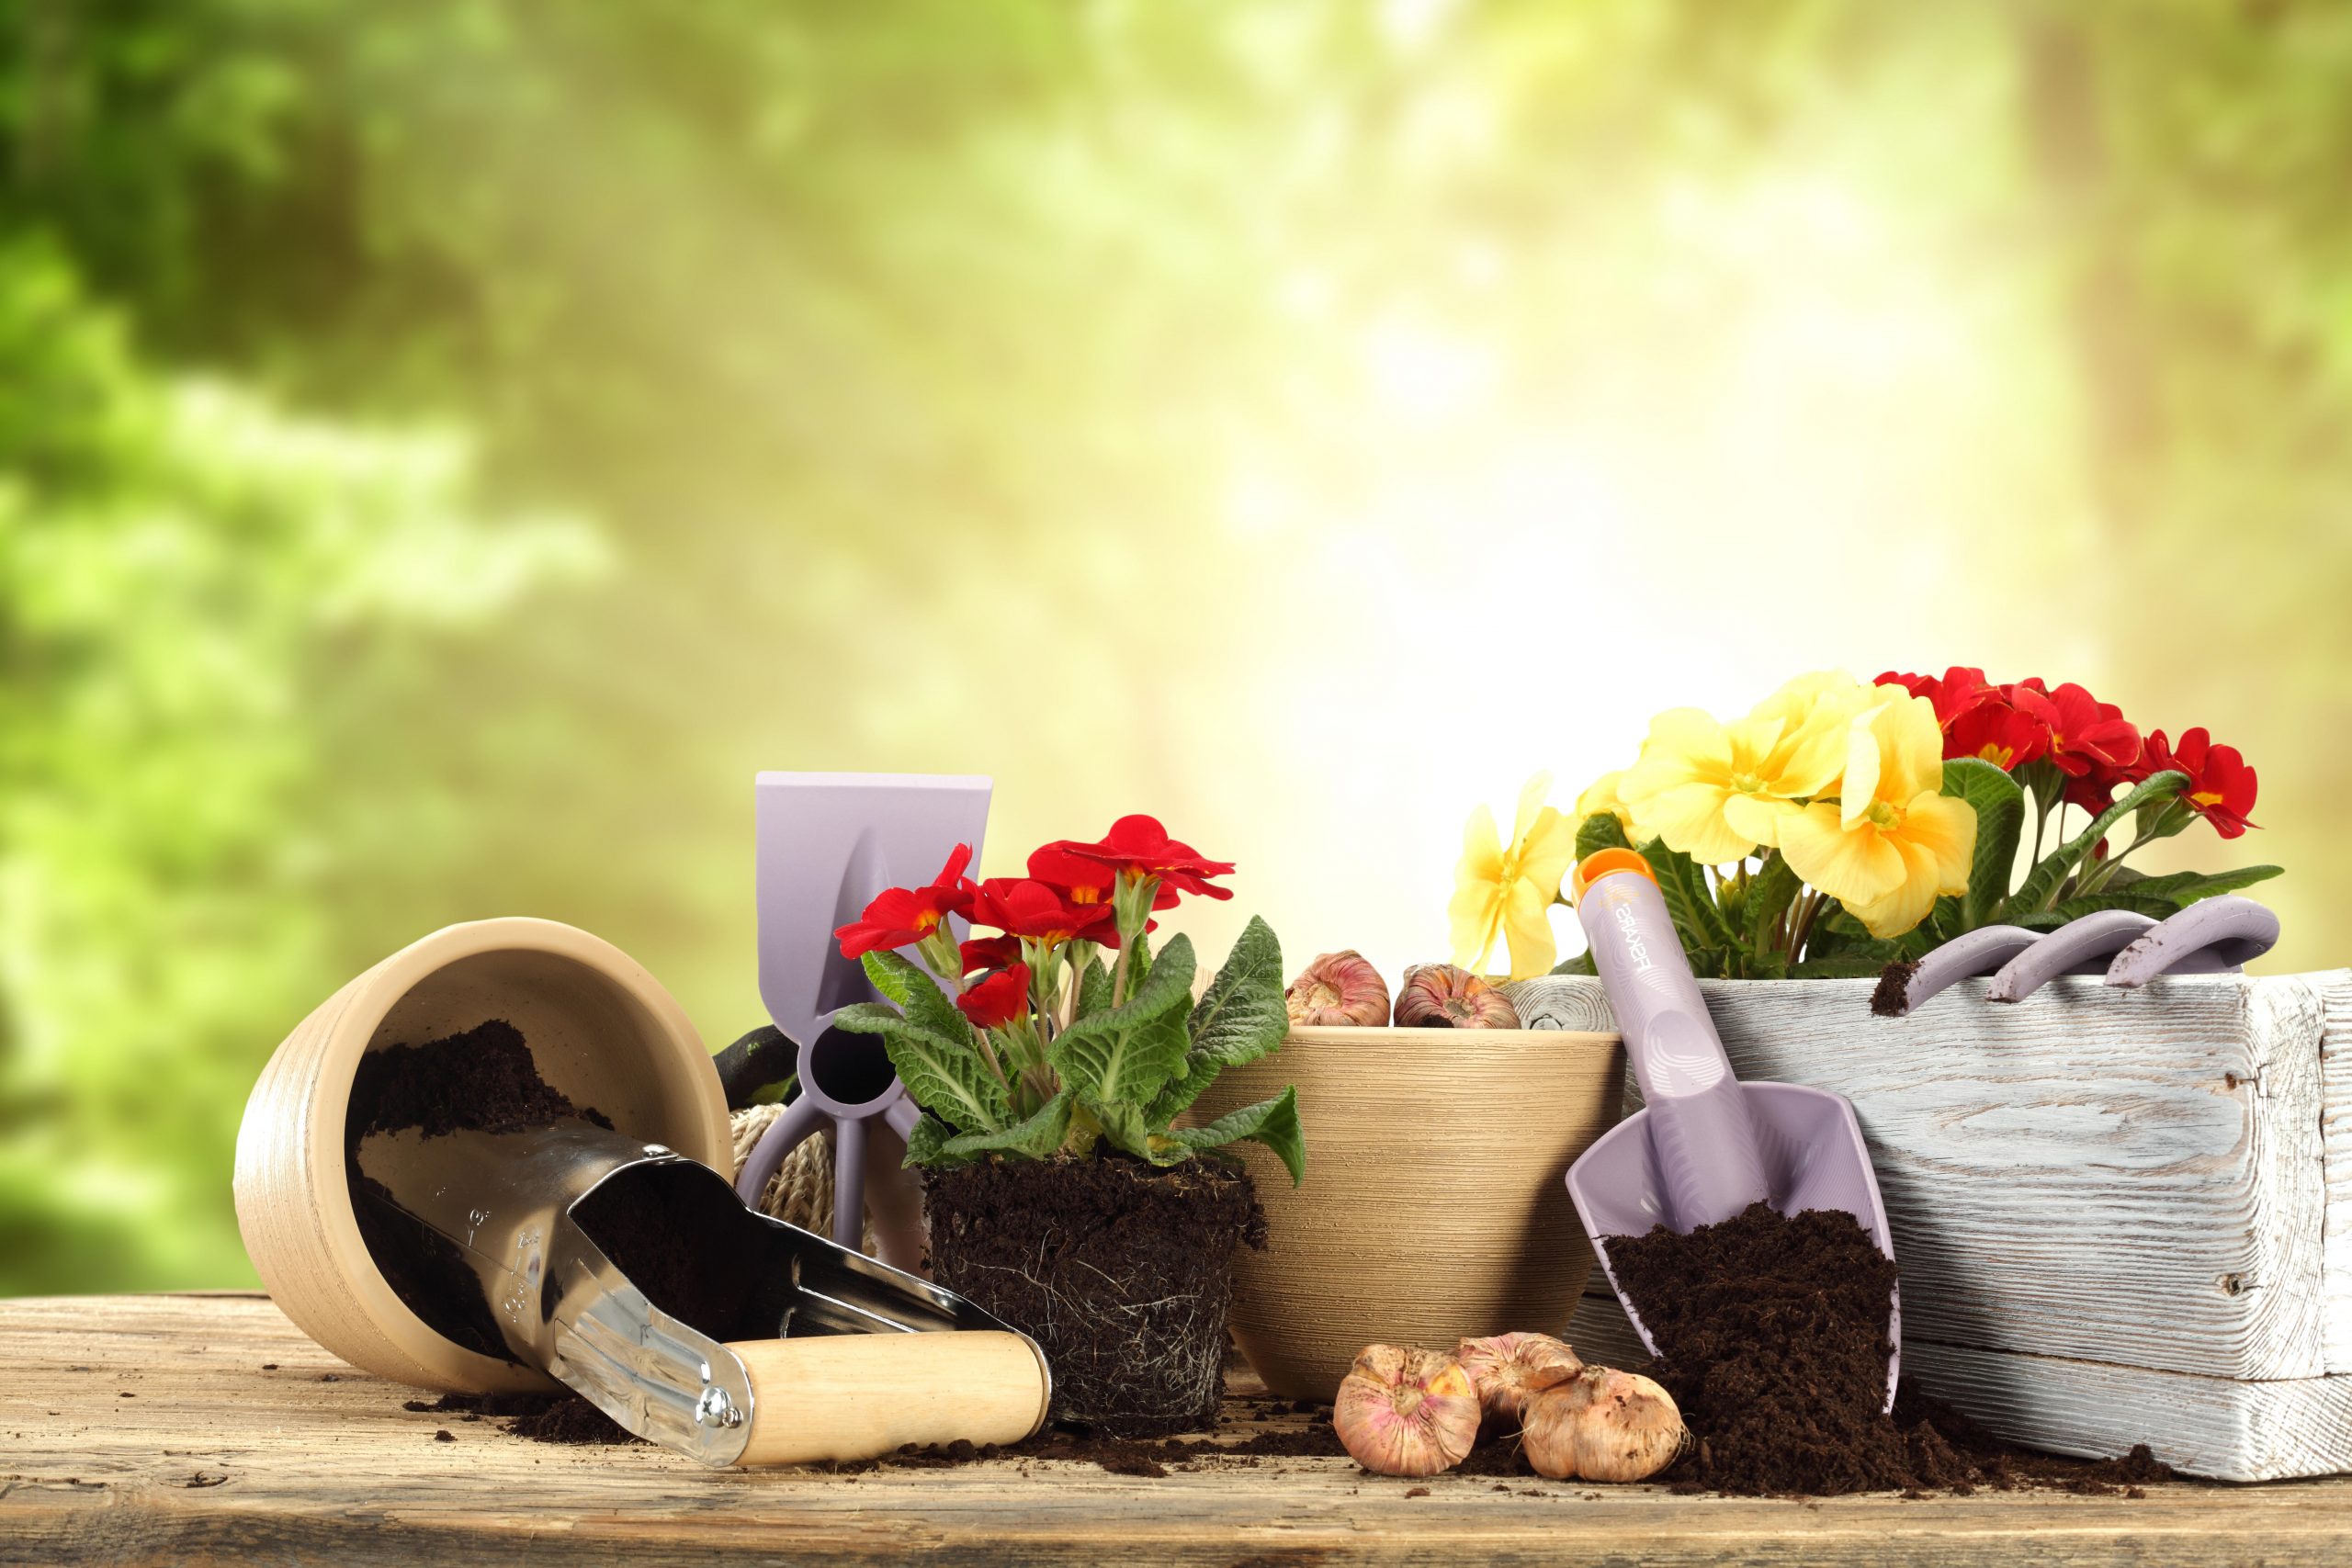 Flower pots, soil, tools and plants